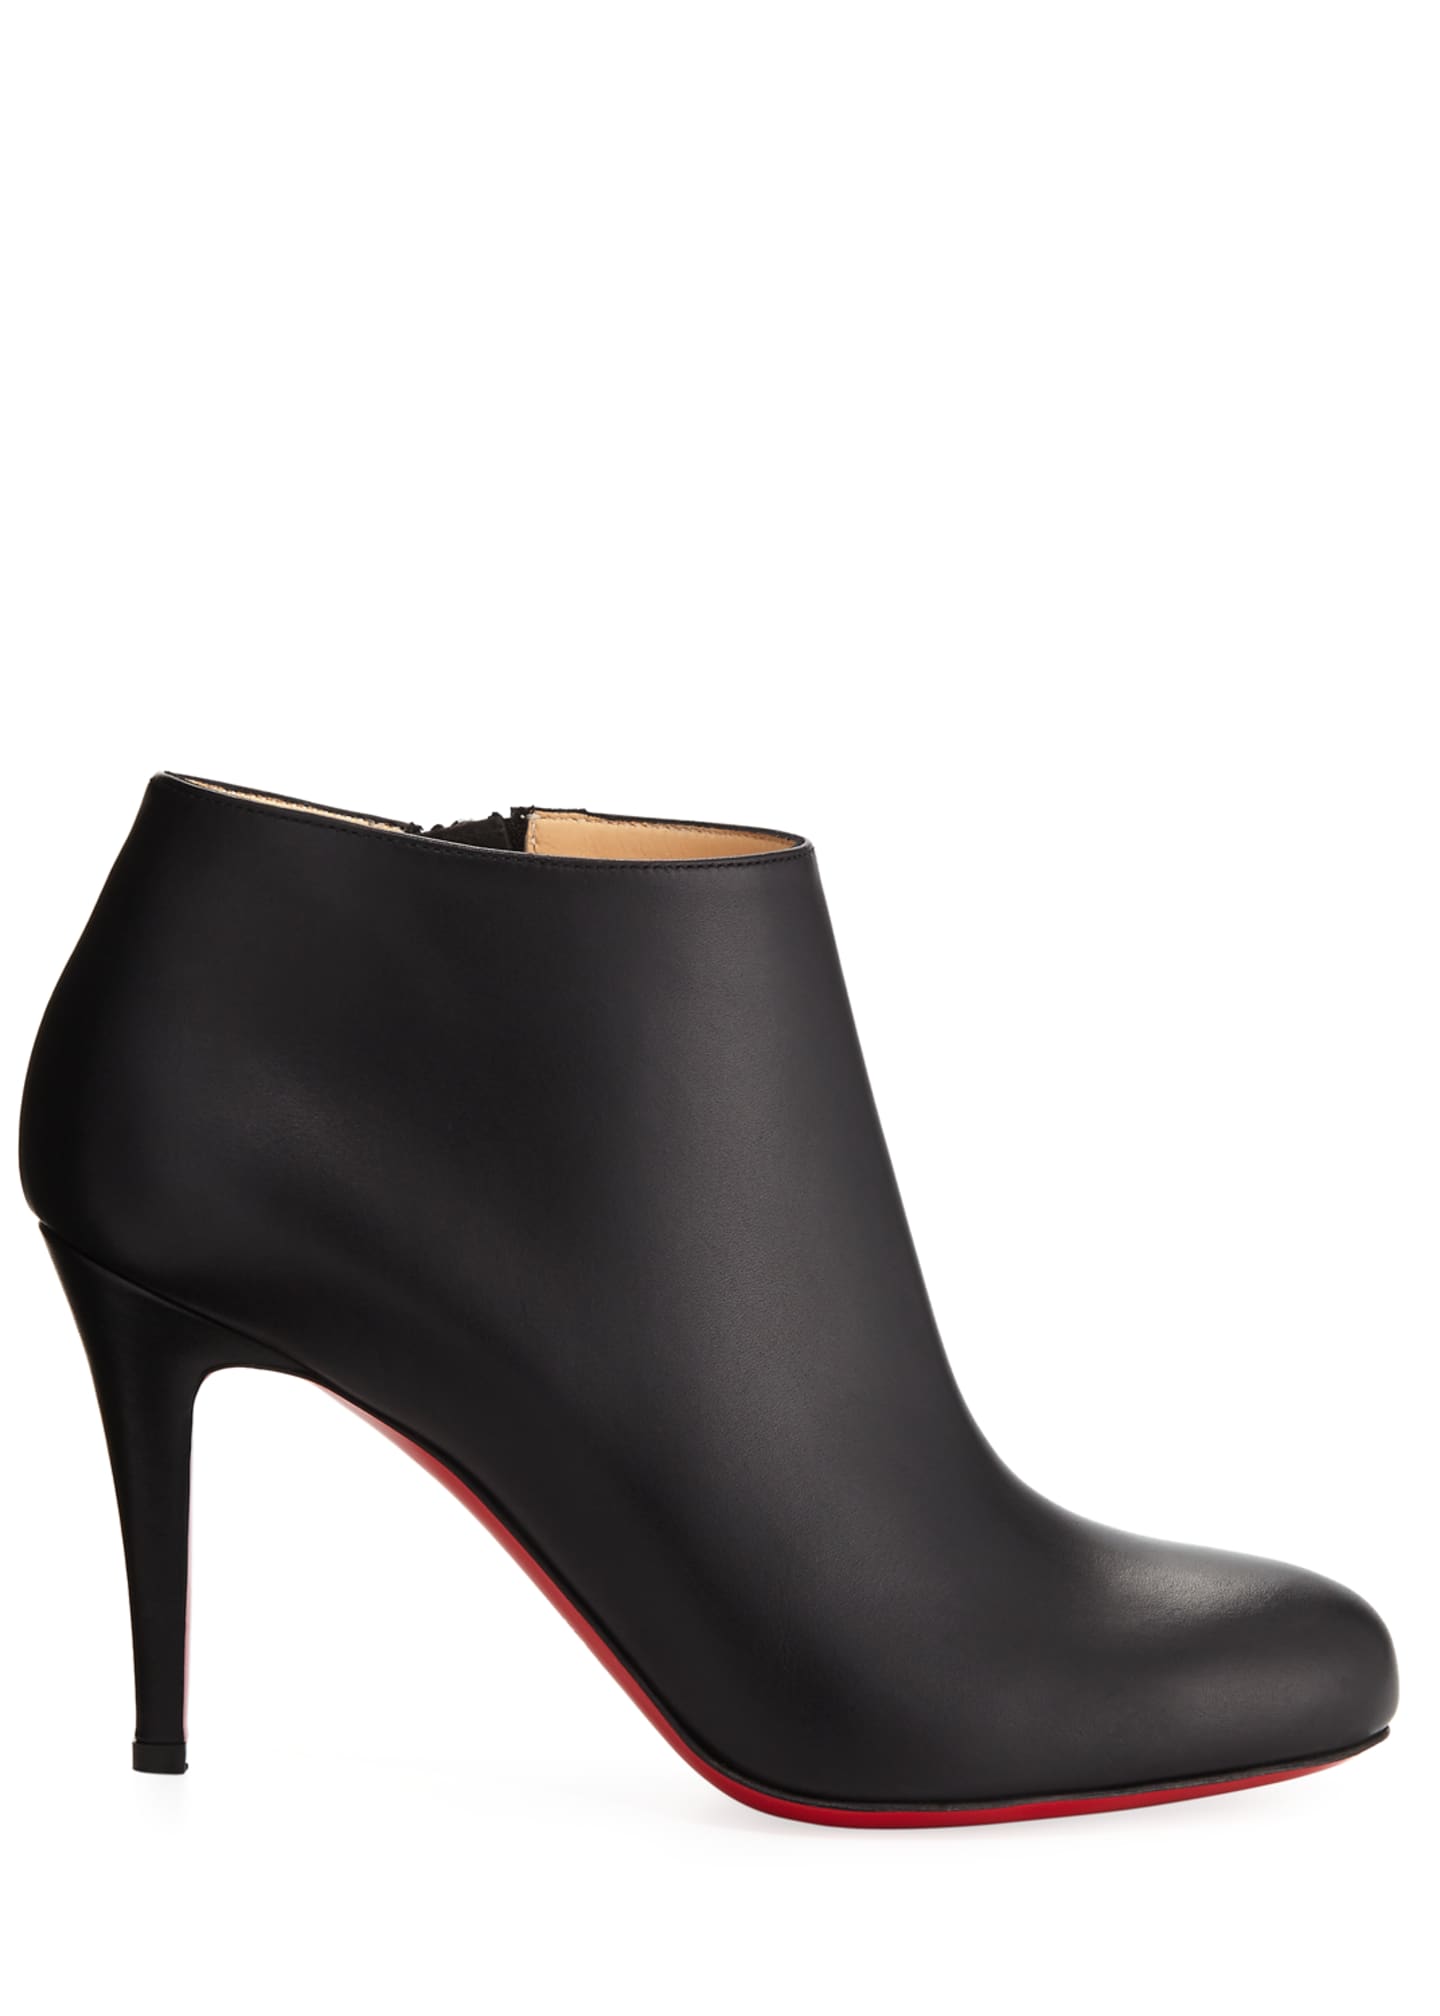 Christian Louboutin Belle Leather Red-Sole Boots Bergdorf Goodman